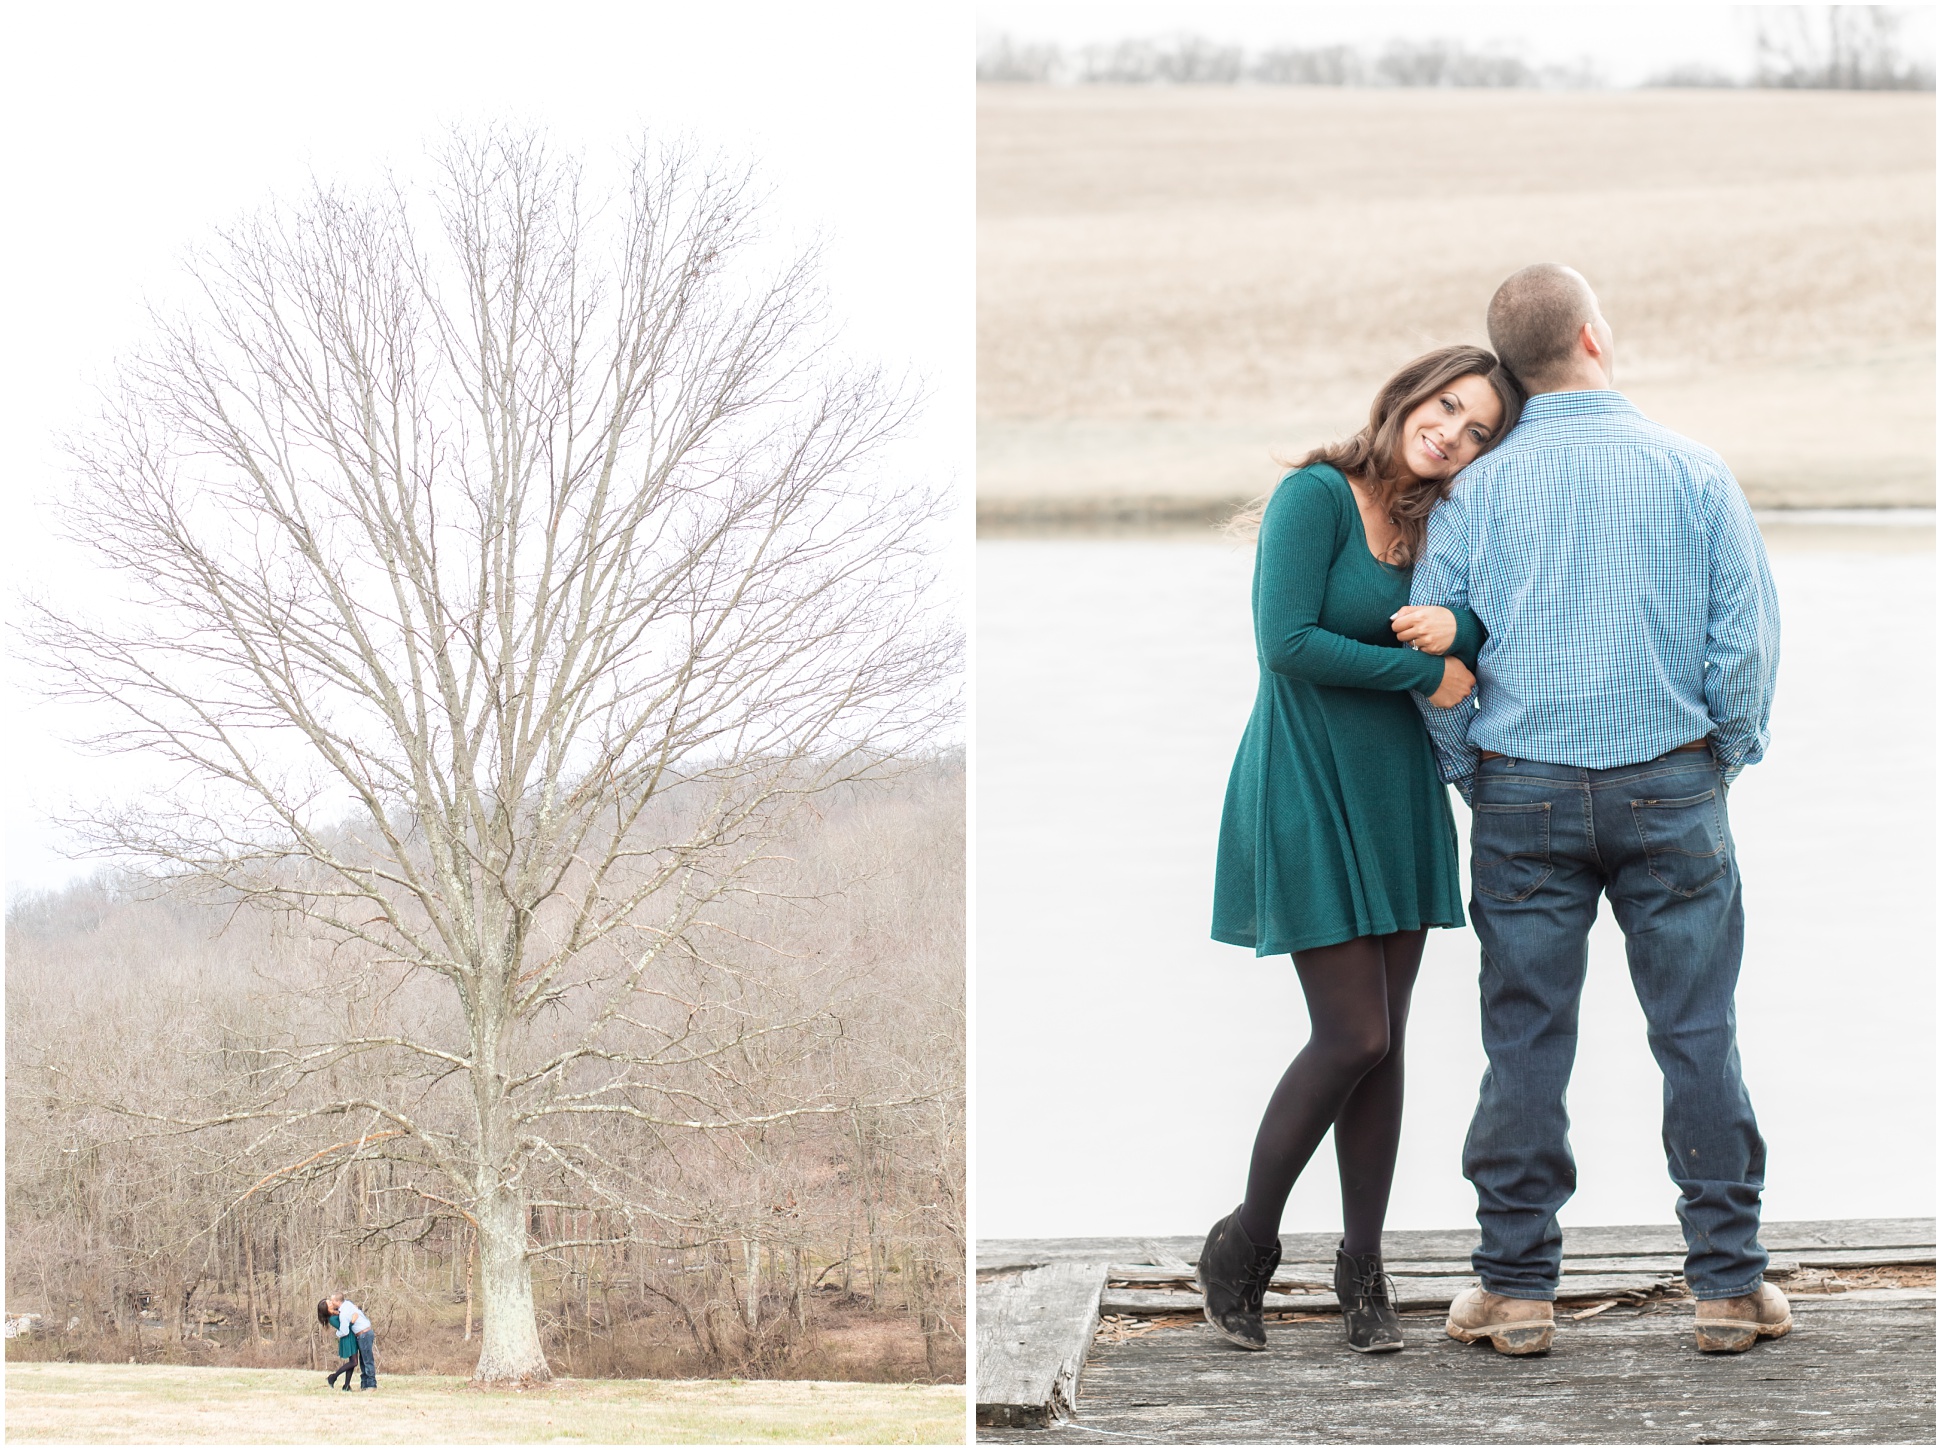 Left Image: Valerie and Ryan standing under a tree, right image: Valerie relaxing on Ryan's shoulder